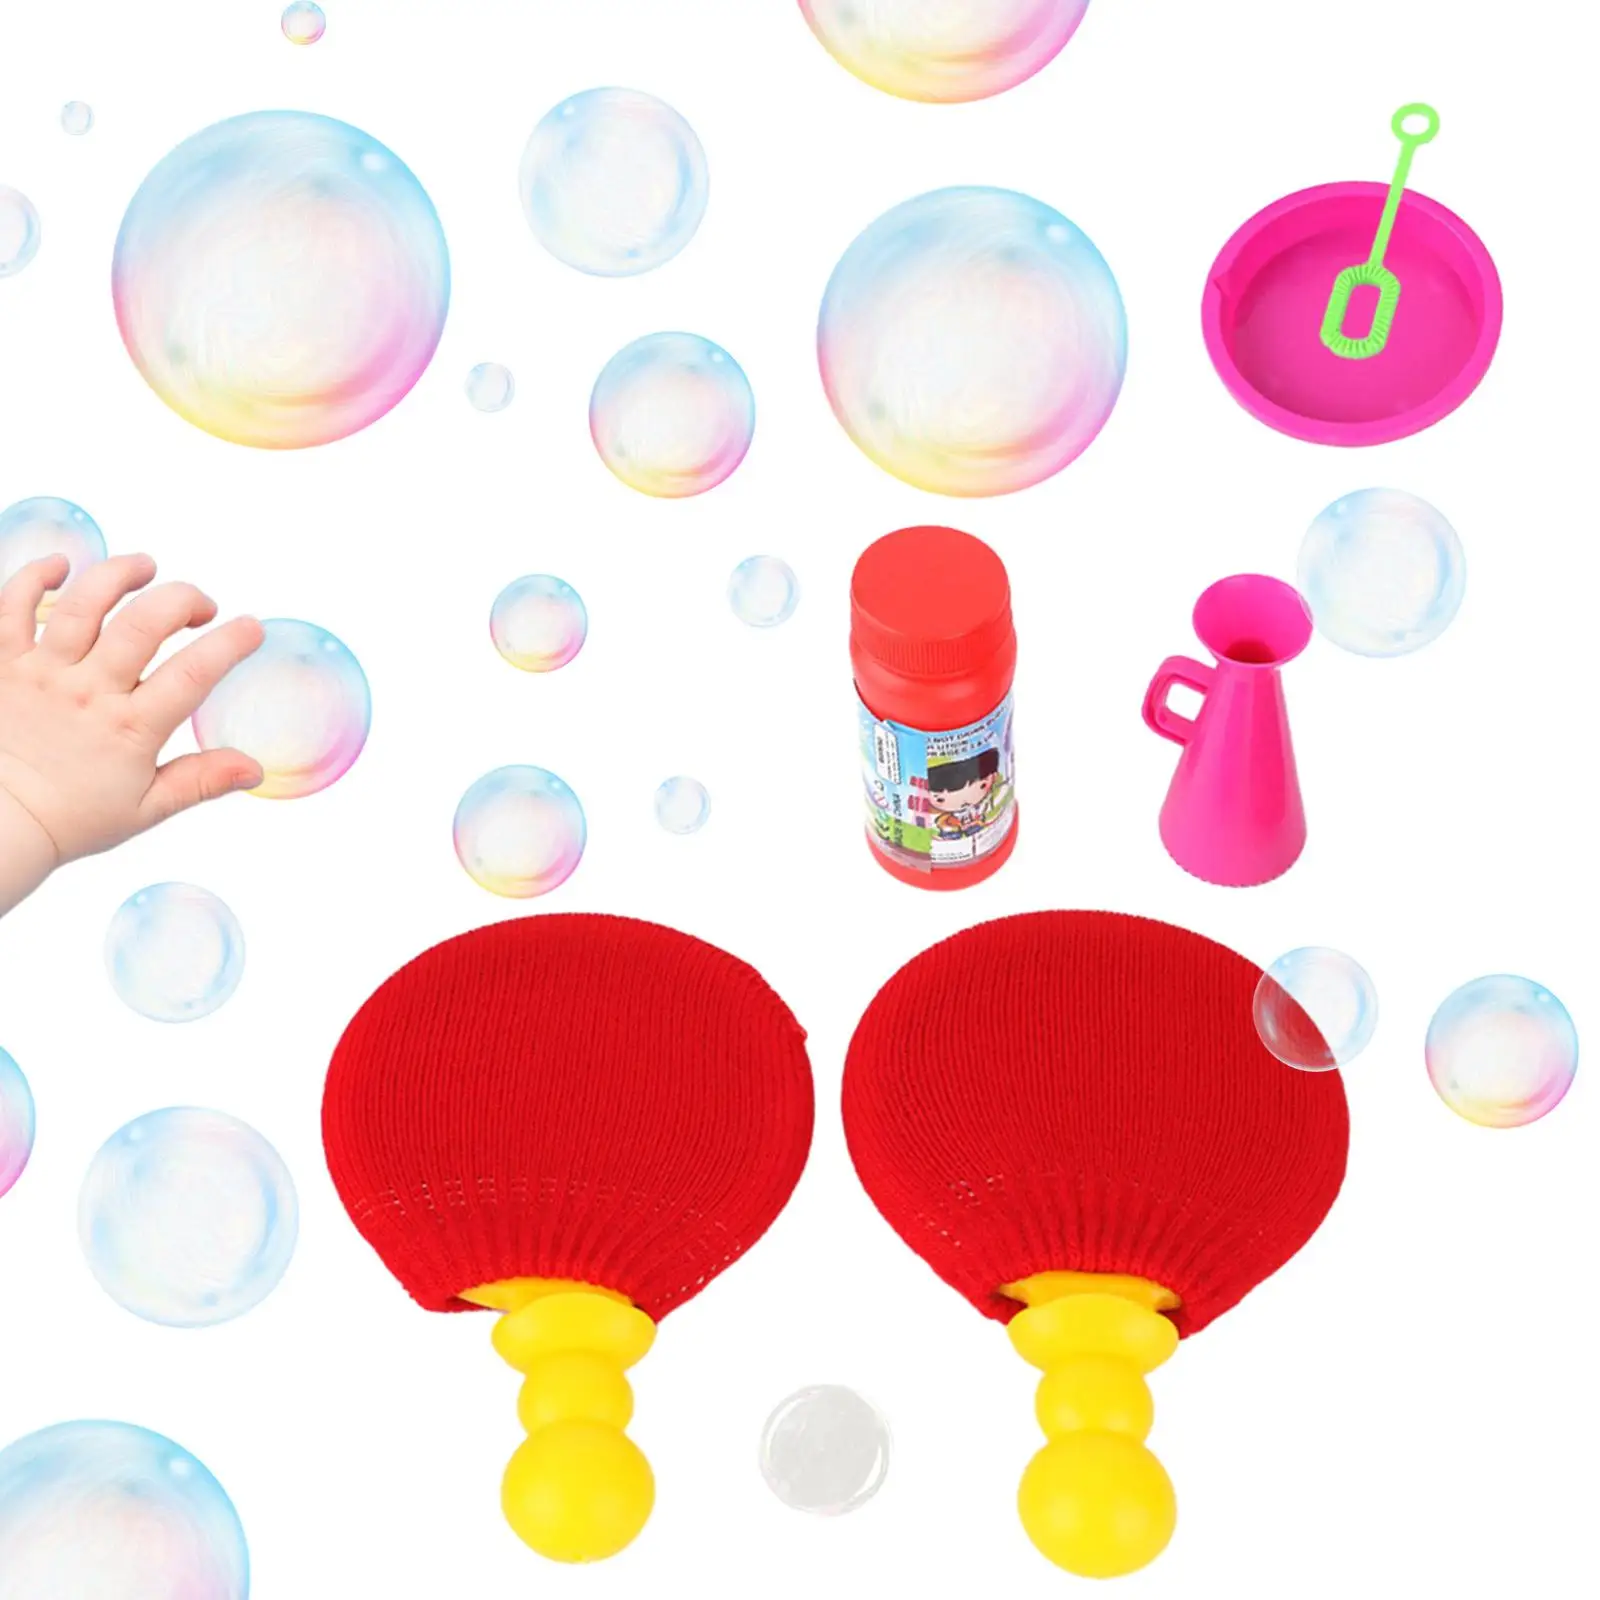 Big Bubble Maker Game Indoor and Play Ping Pong Game with Soap Bubble for Kids Children Girls Boys Toddlers Great Gift